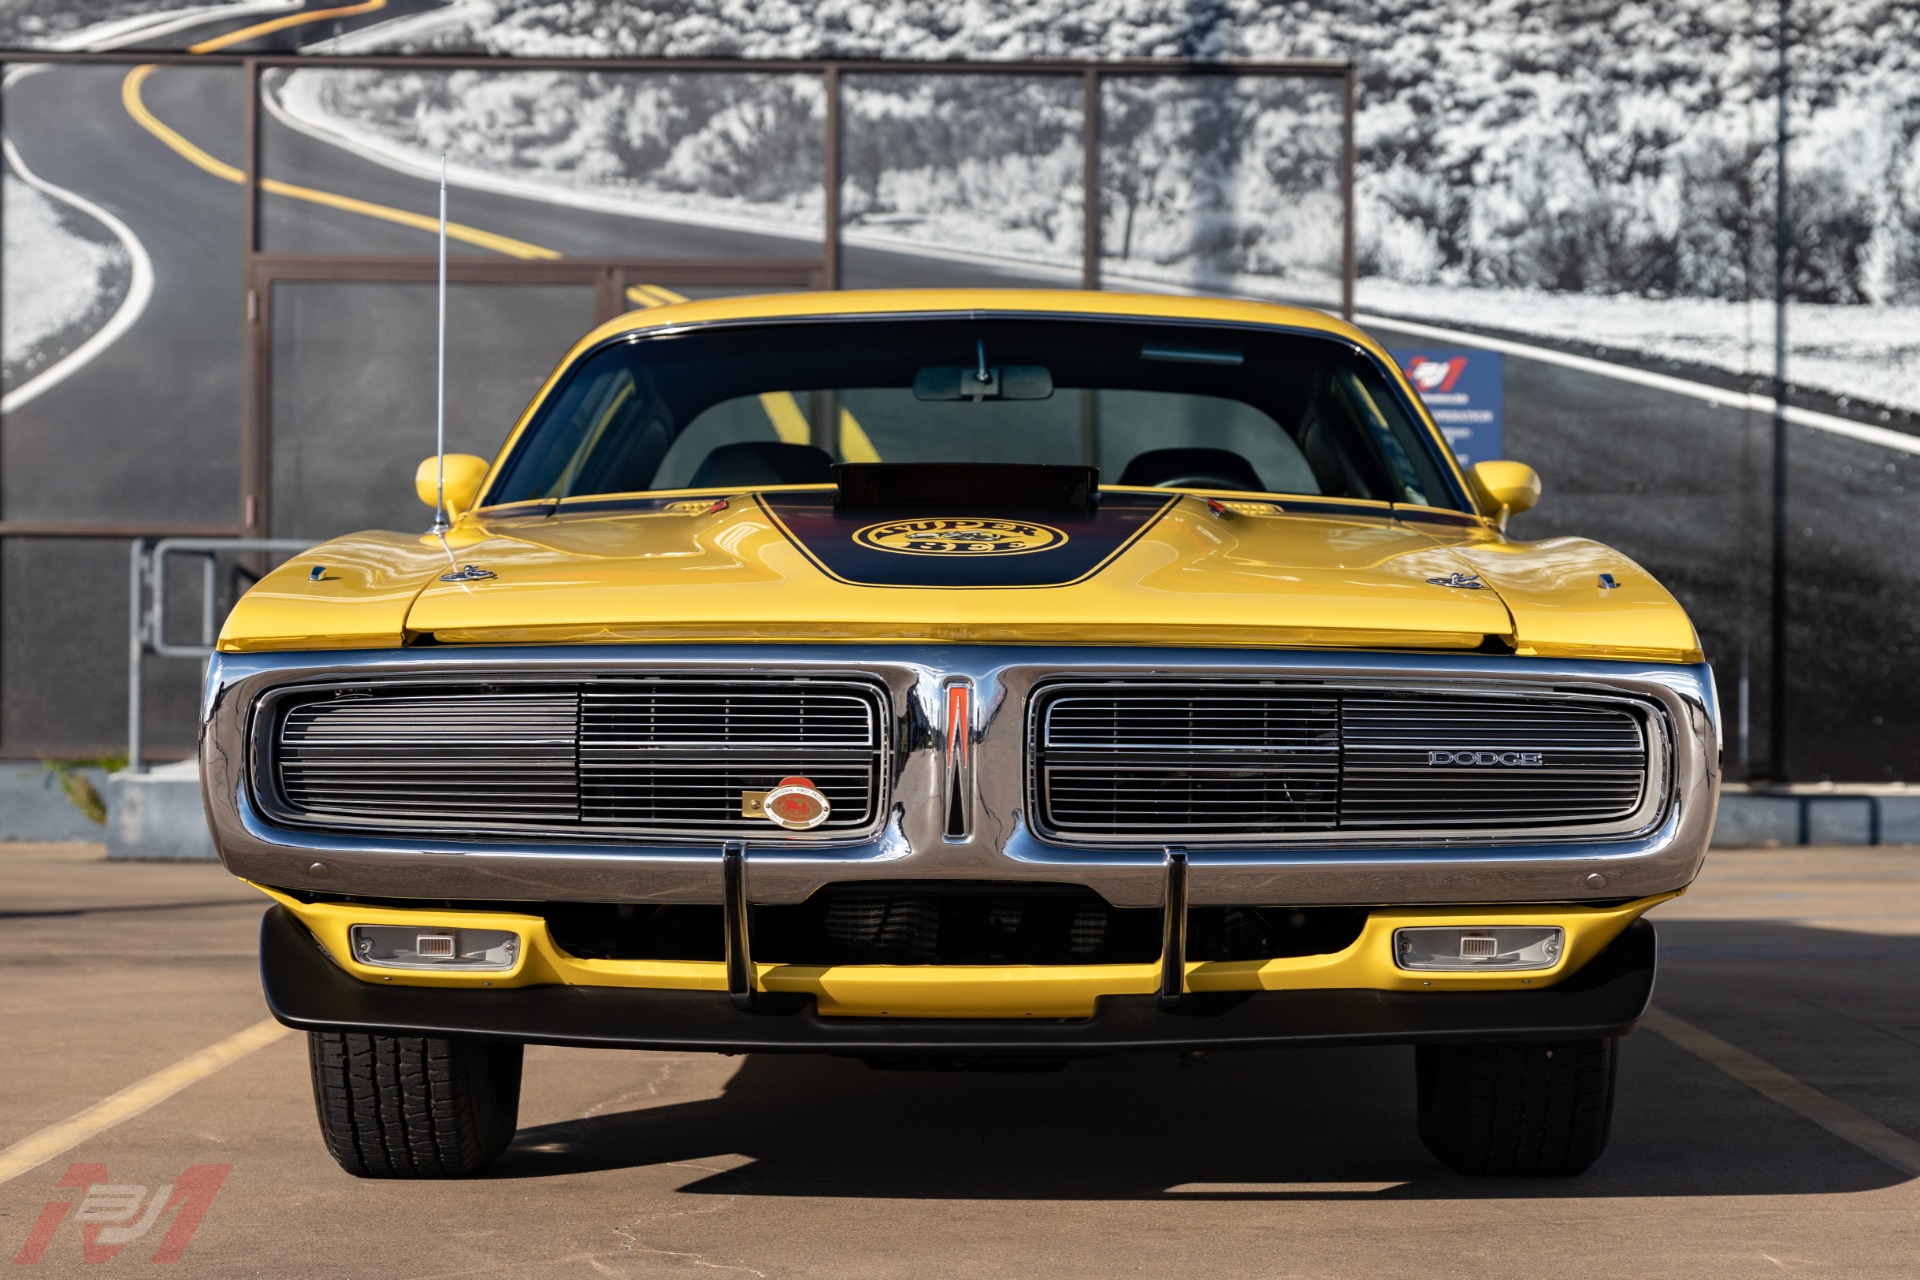 Used-1971-Dodge-Charger-Super-Bee-440-Six-Pack